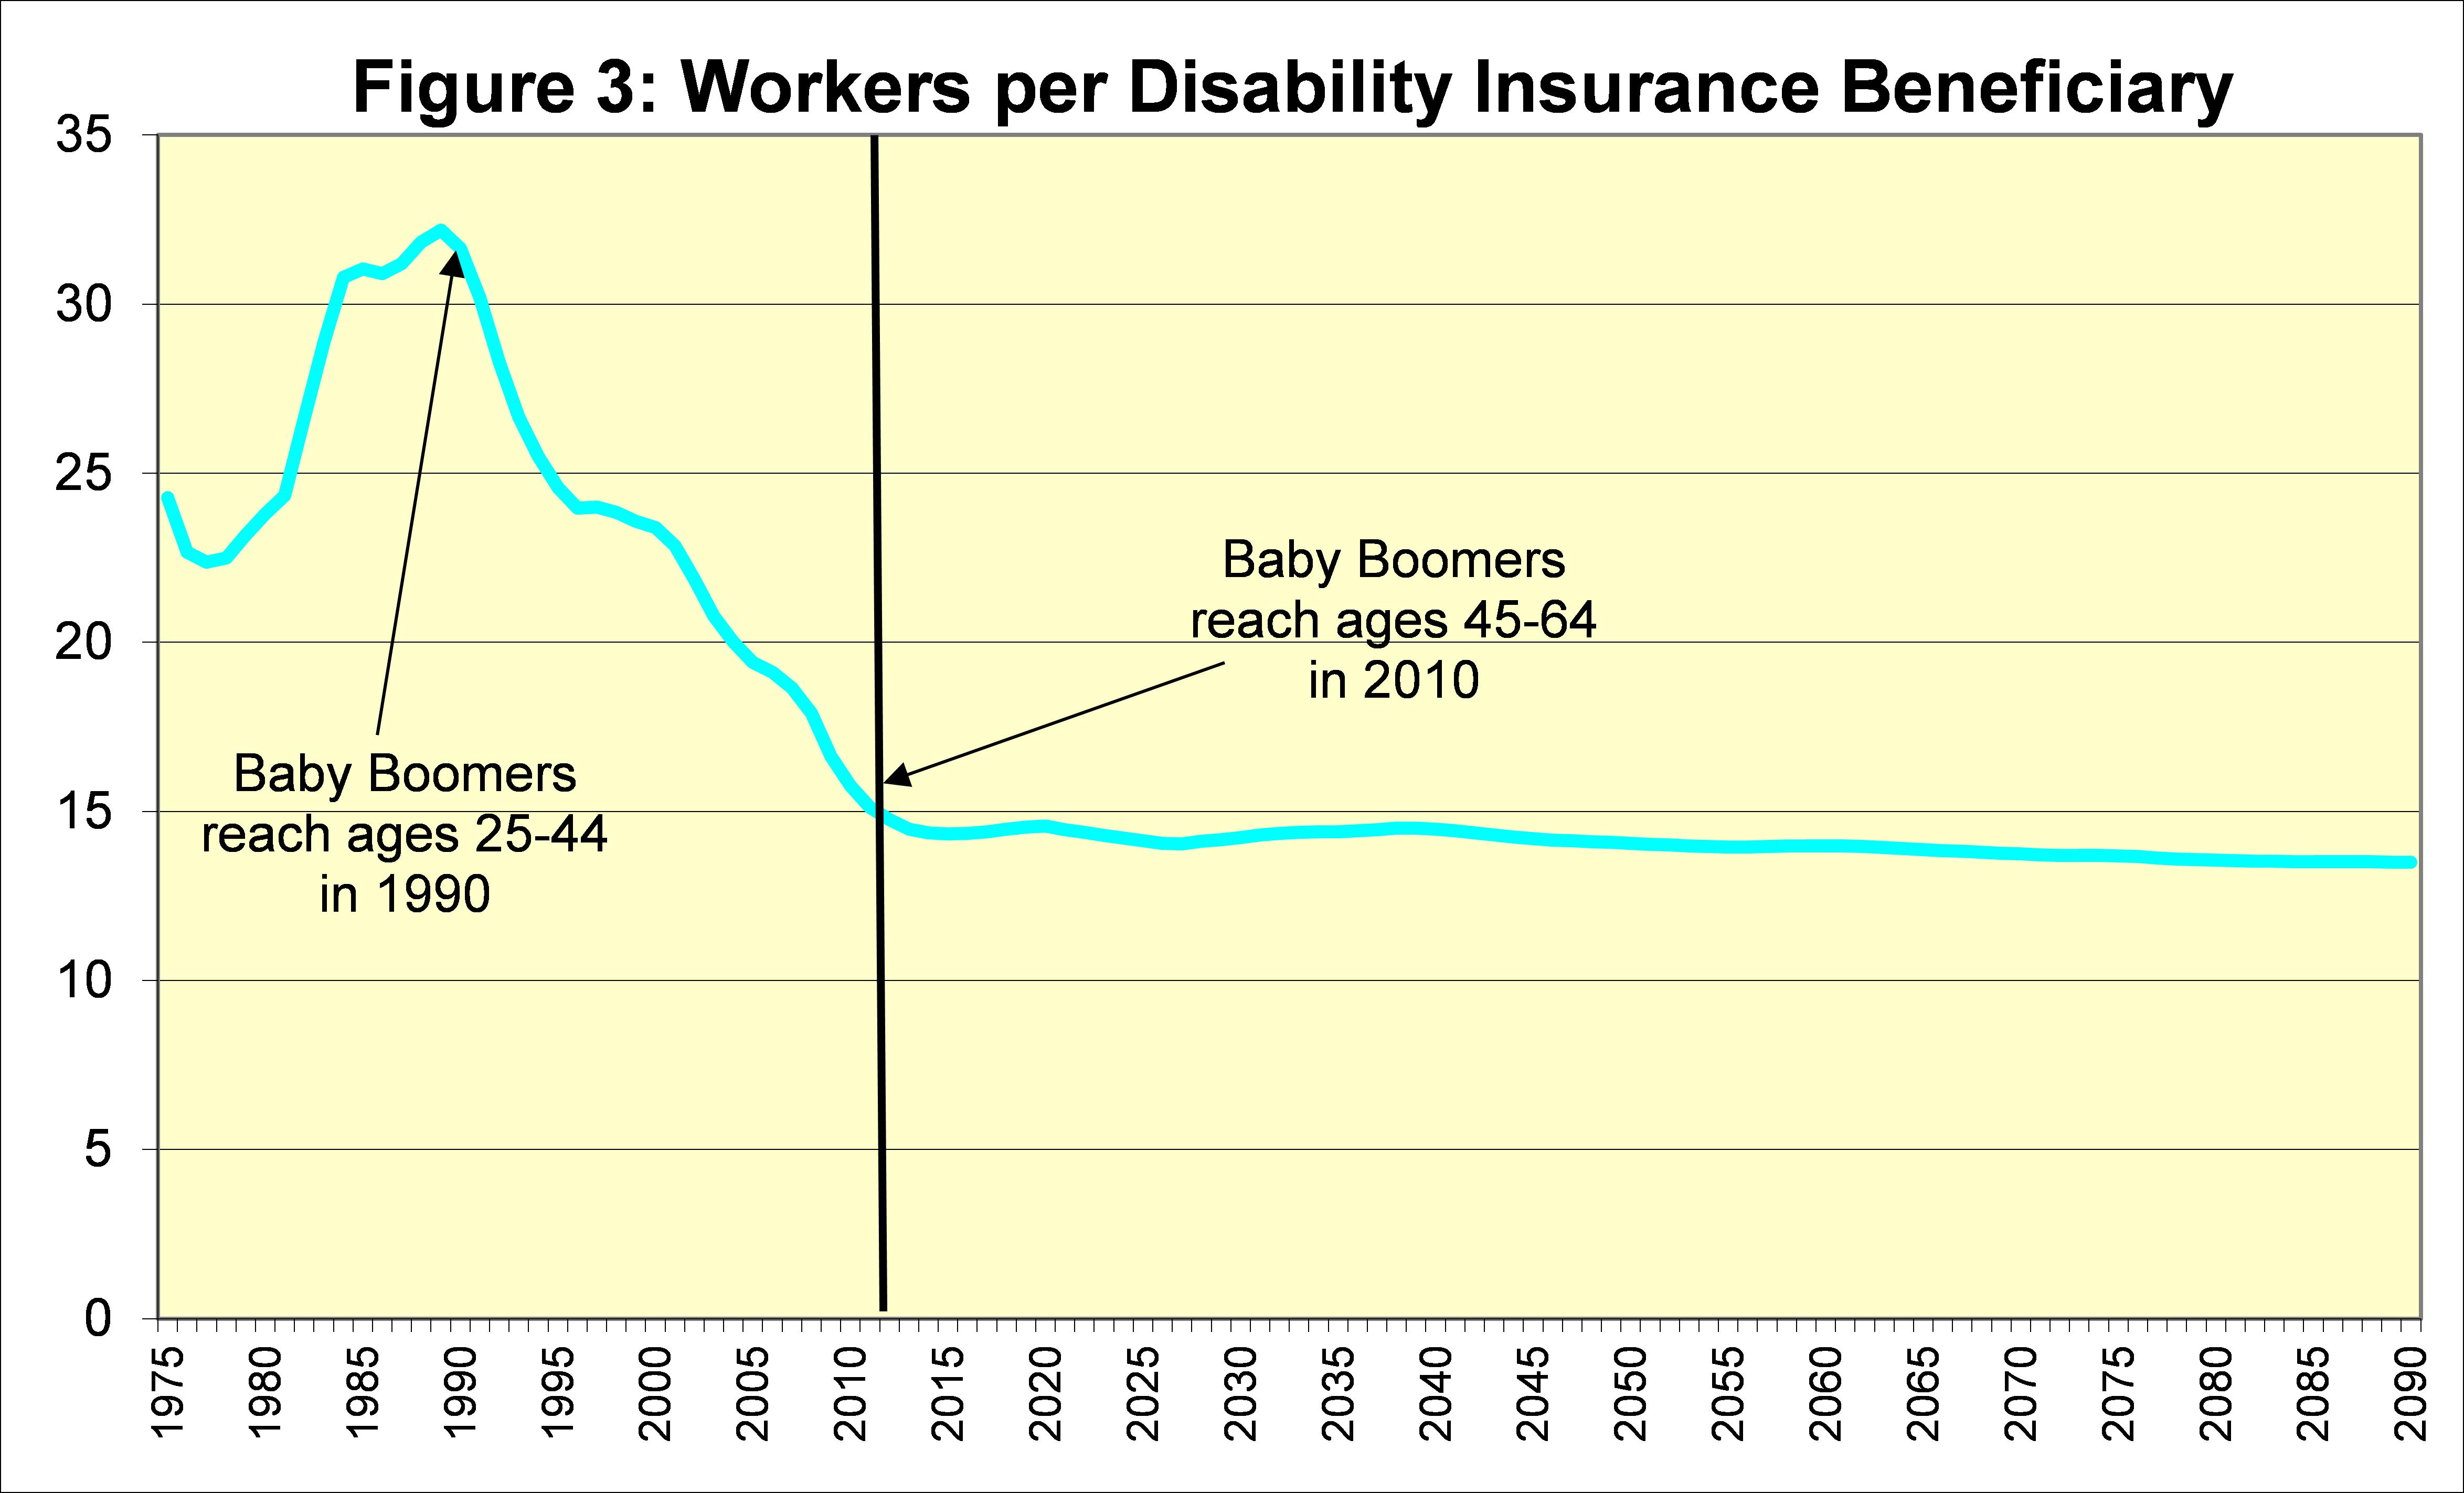 Workers per DI Beneficiary Chart